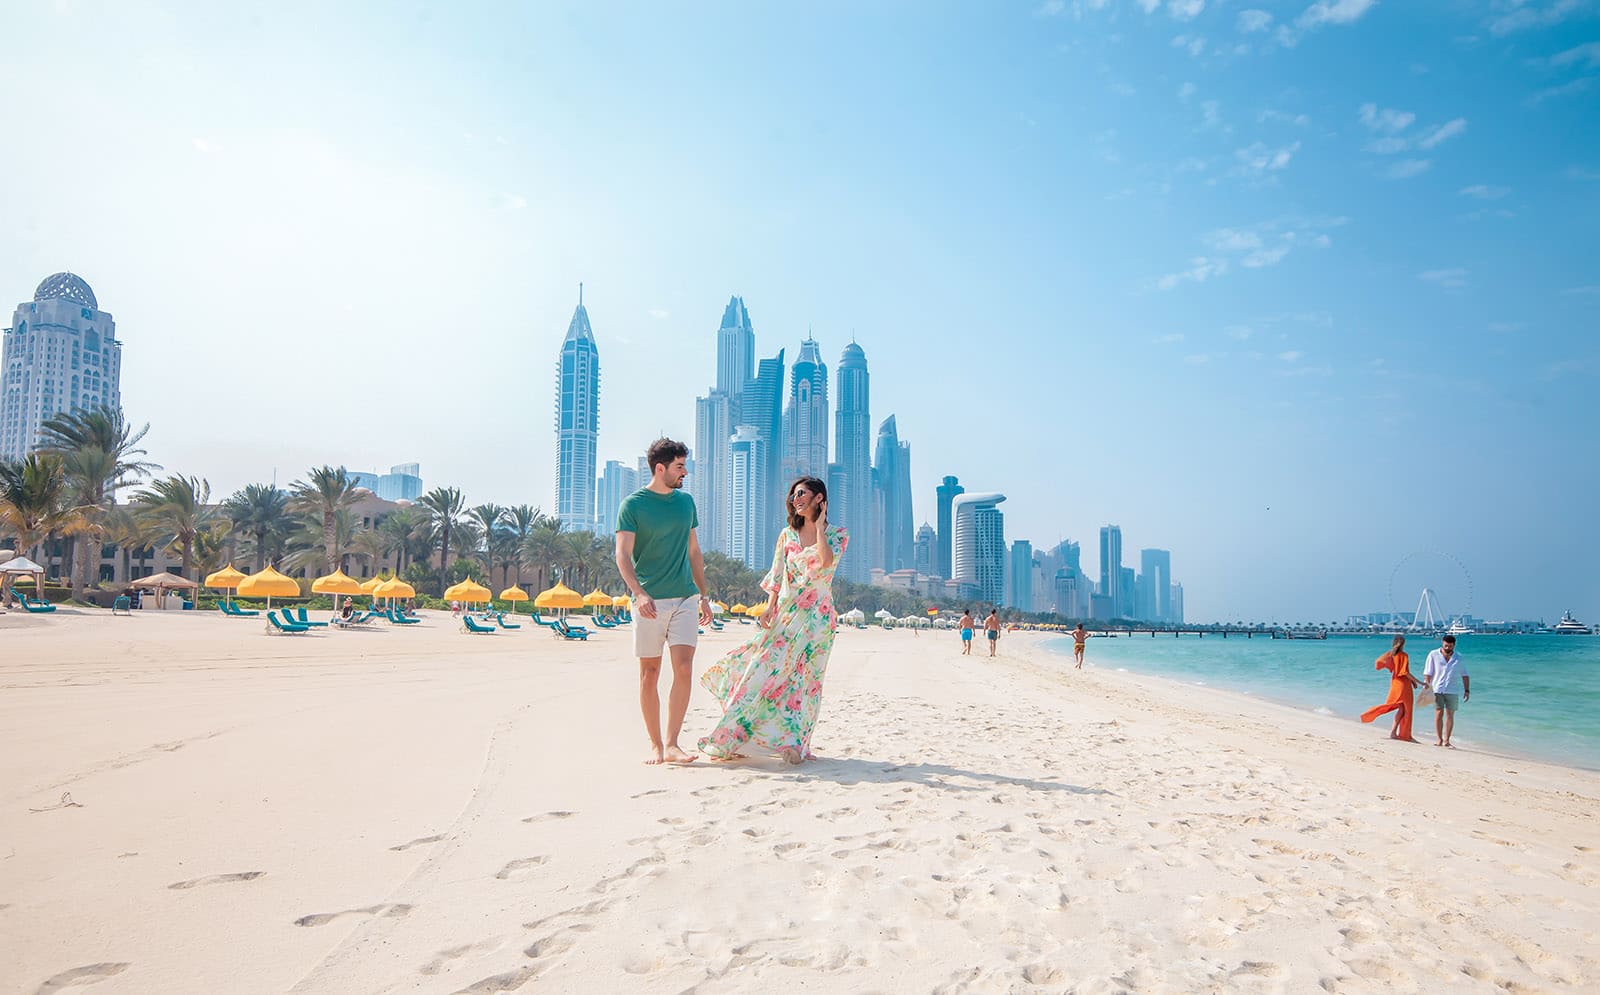 Dubai during Covid-19: What it's like to visit as a tourist right now